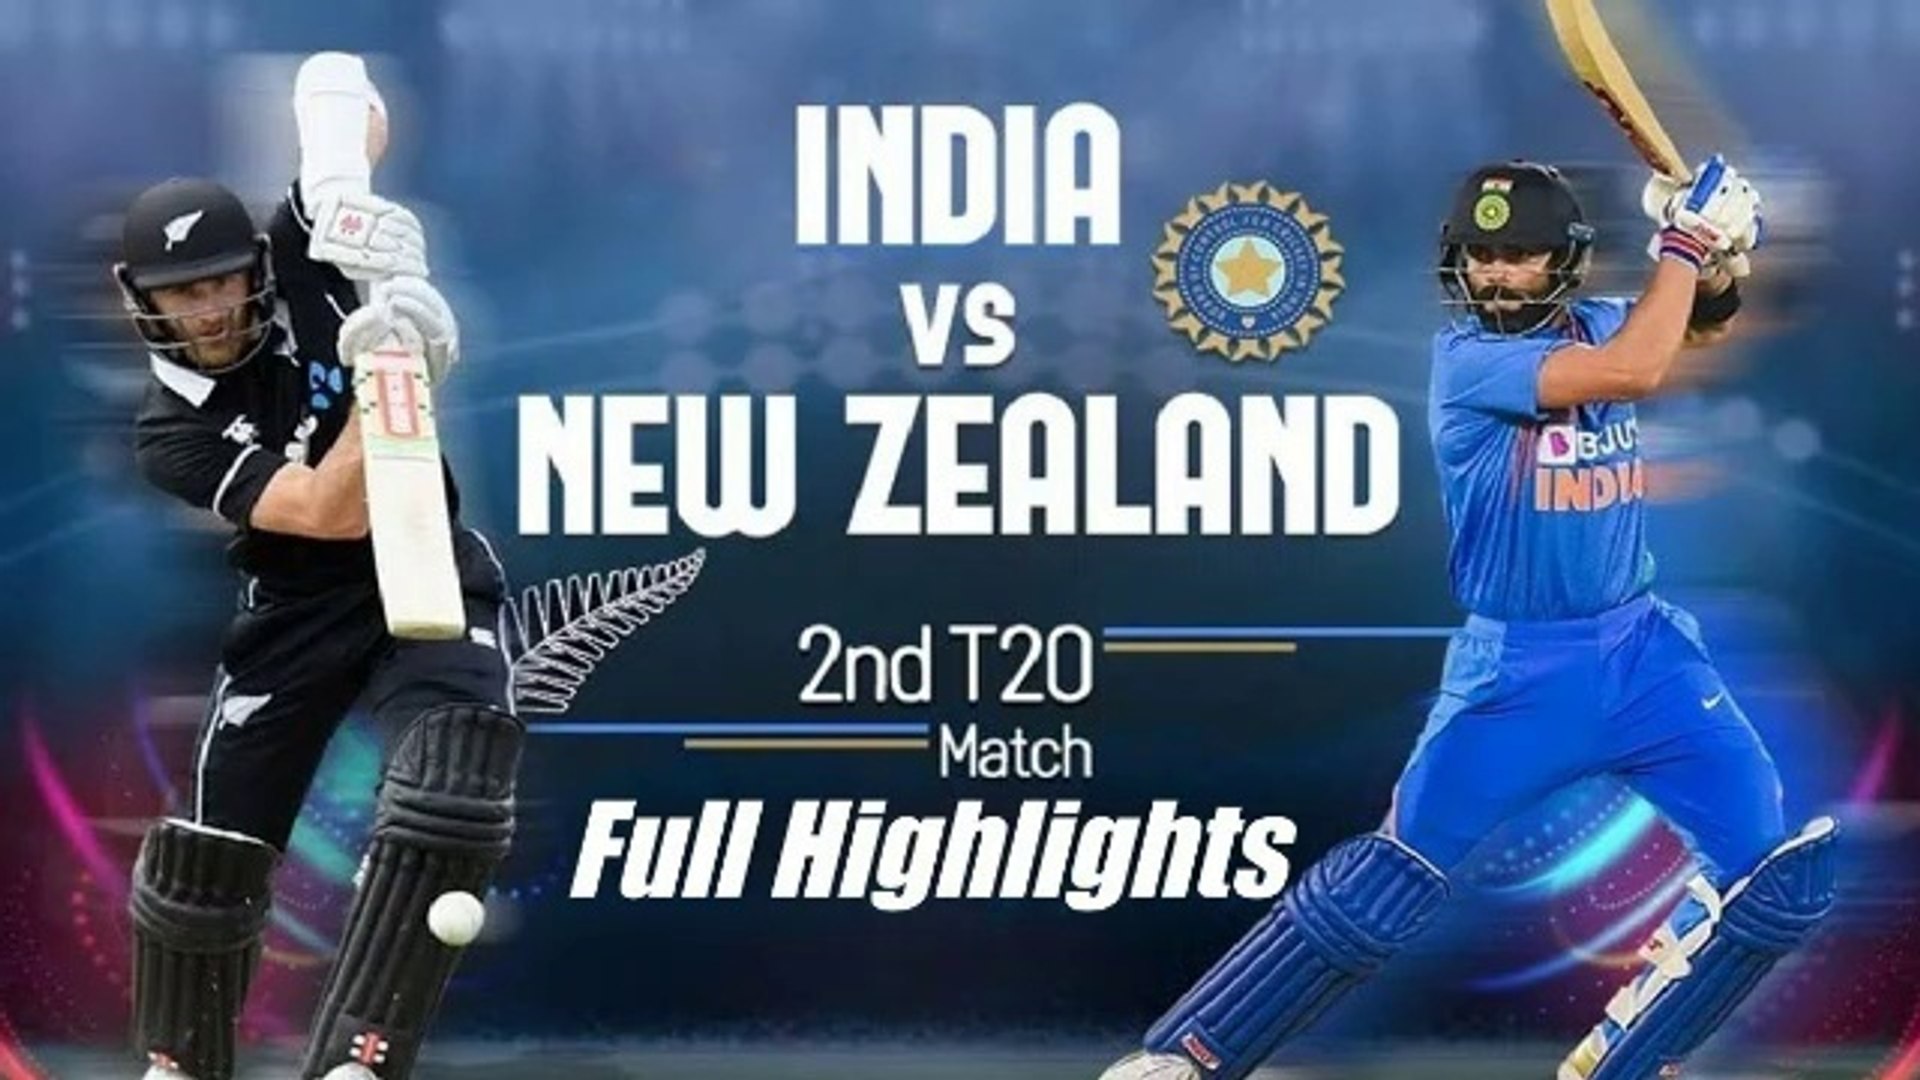 India vs New Zealand 2nd T20 Full Highlights 2020 - video Dailymotion